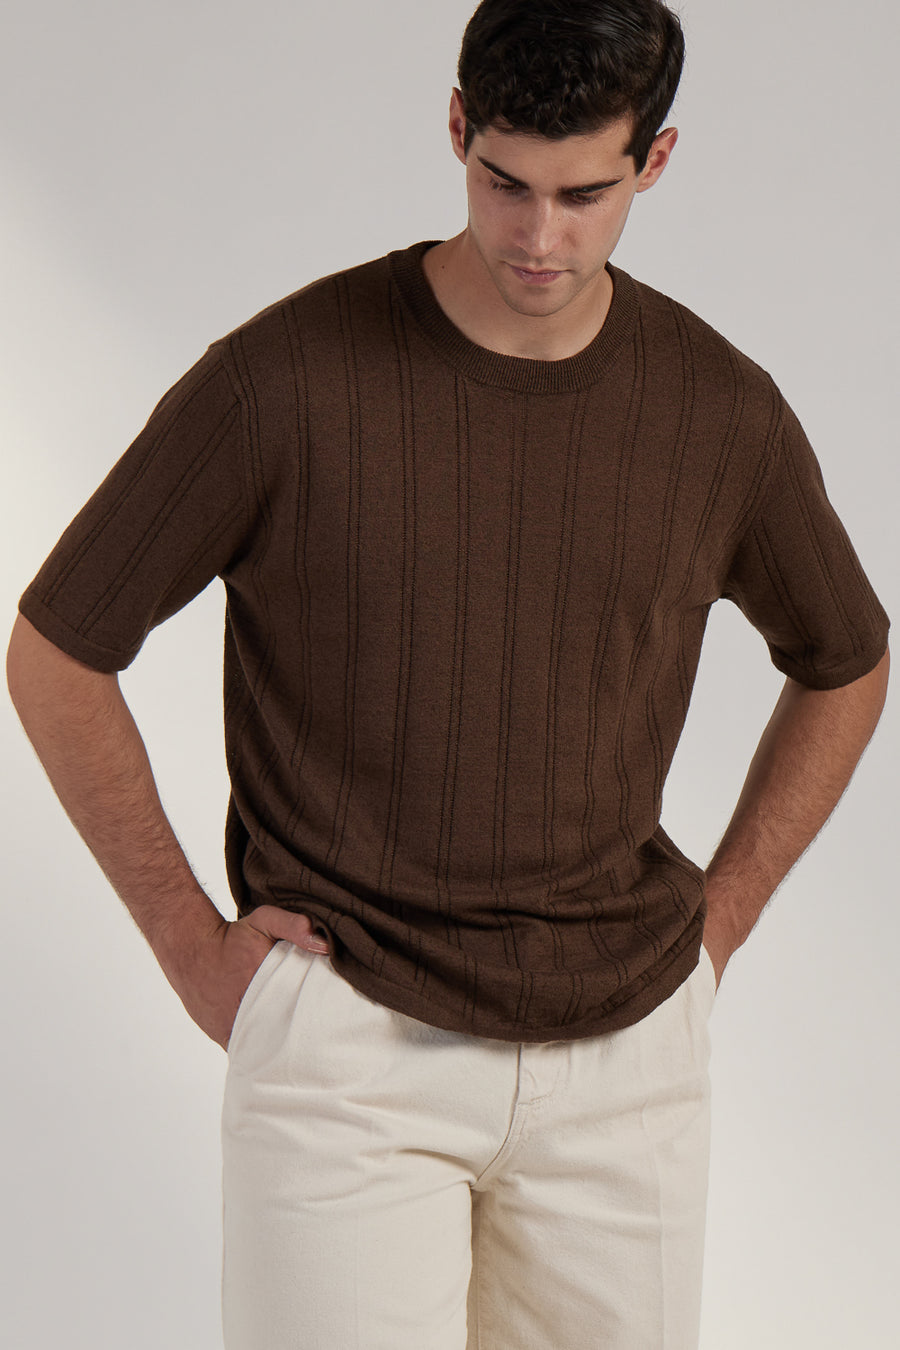 Buy the Daniele Fiesoli Ribbed Crew Neck T-Shirt in Brown at Intro. Spend £50 for free UK delivery. Official stockists. We ship worldwide.